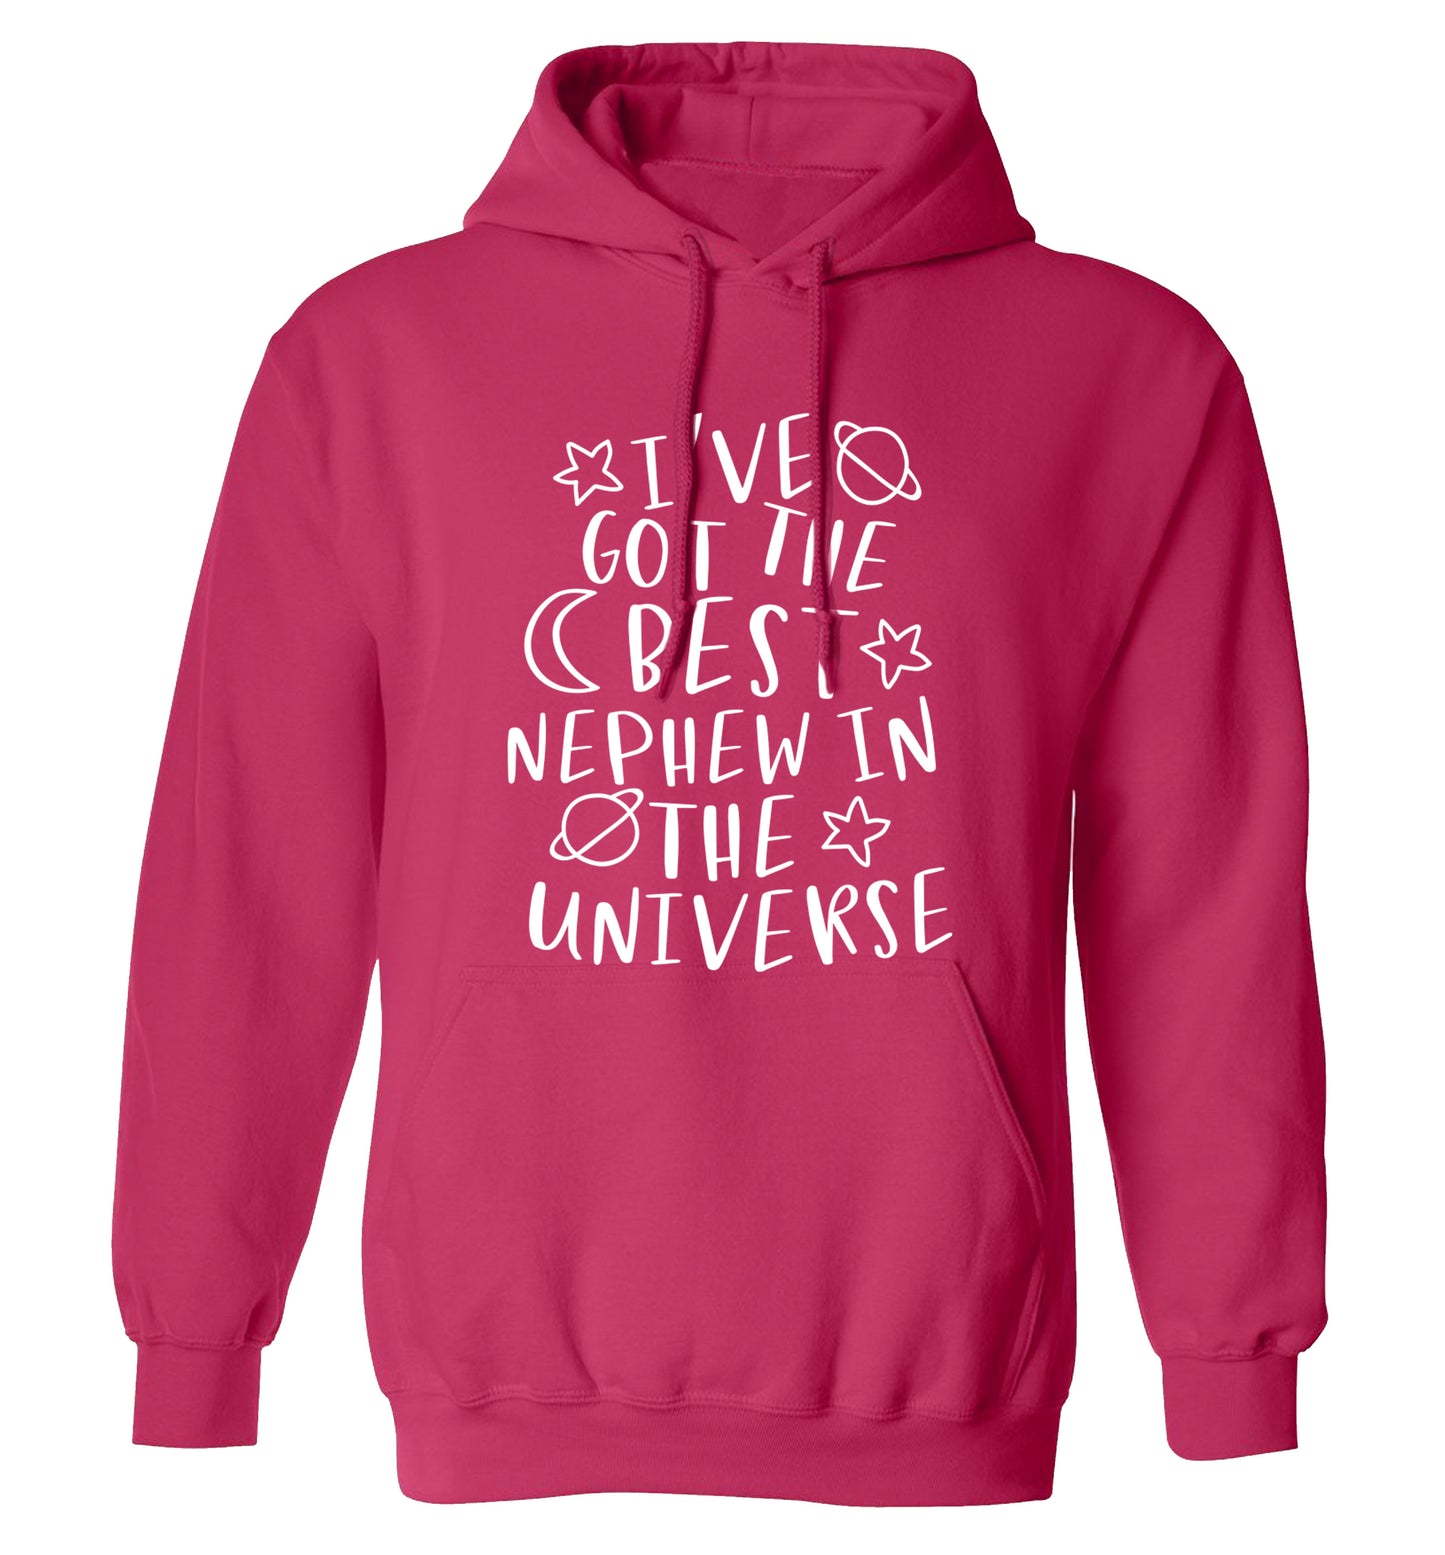 I've got the best nephew in the universe adults unisex pink hoodie 2XL